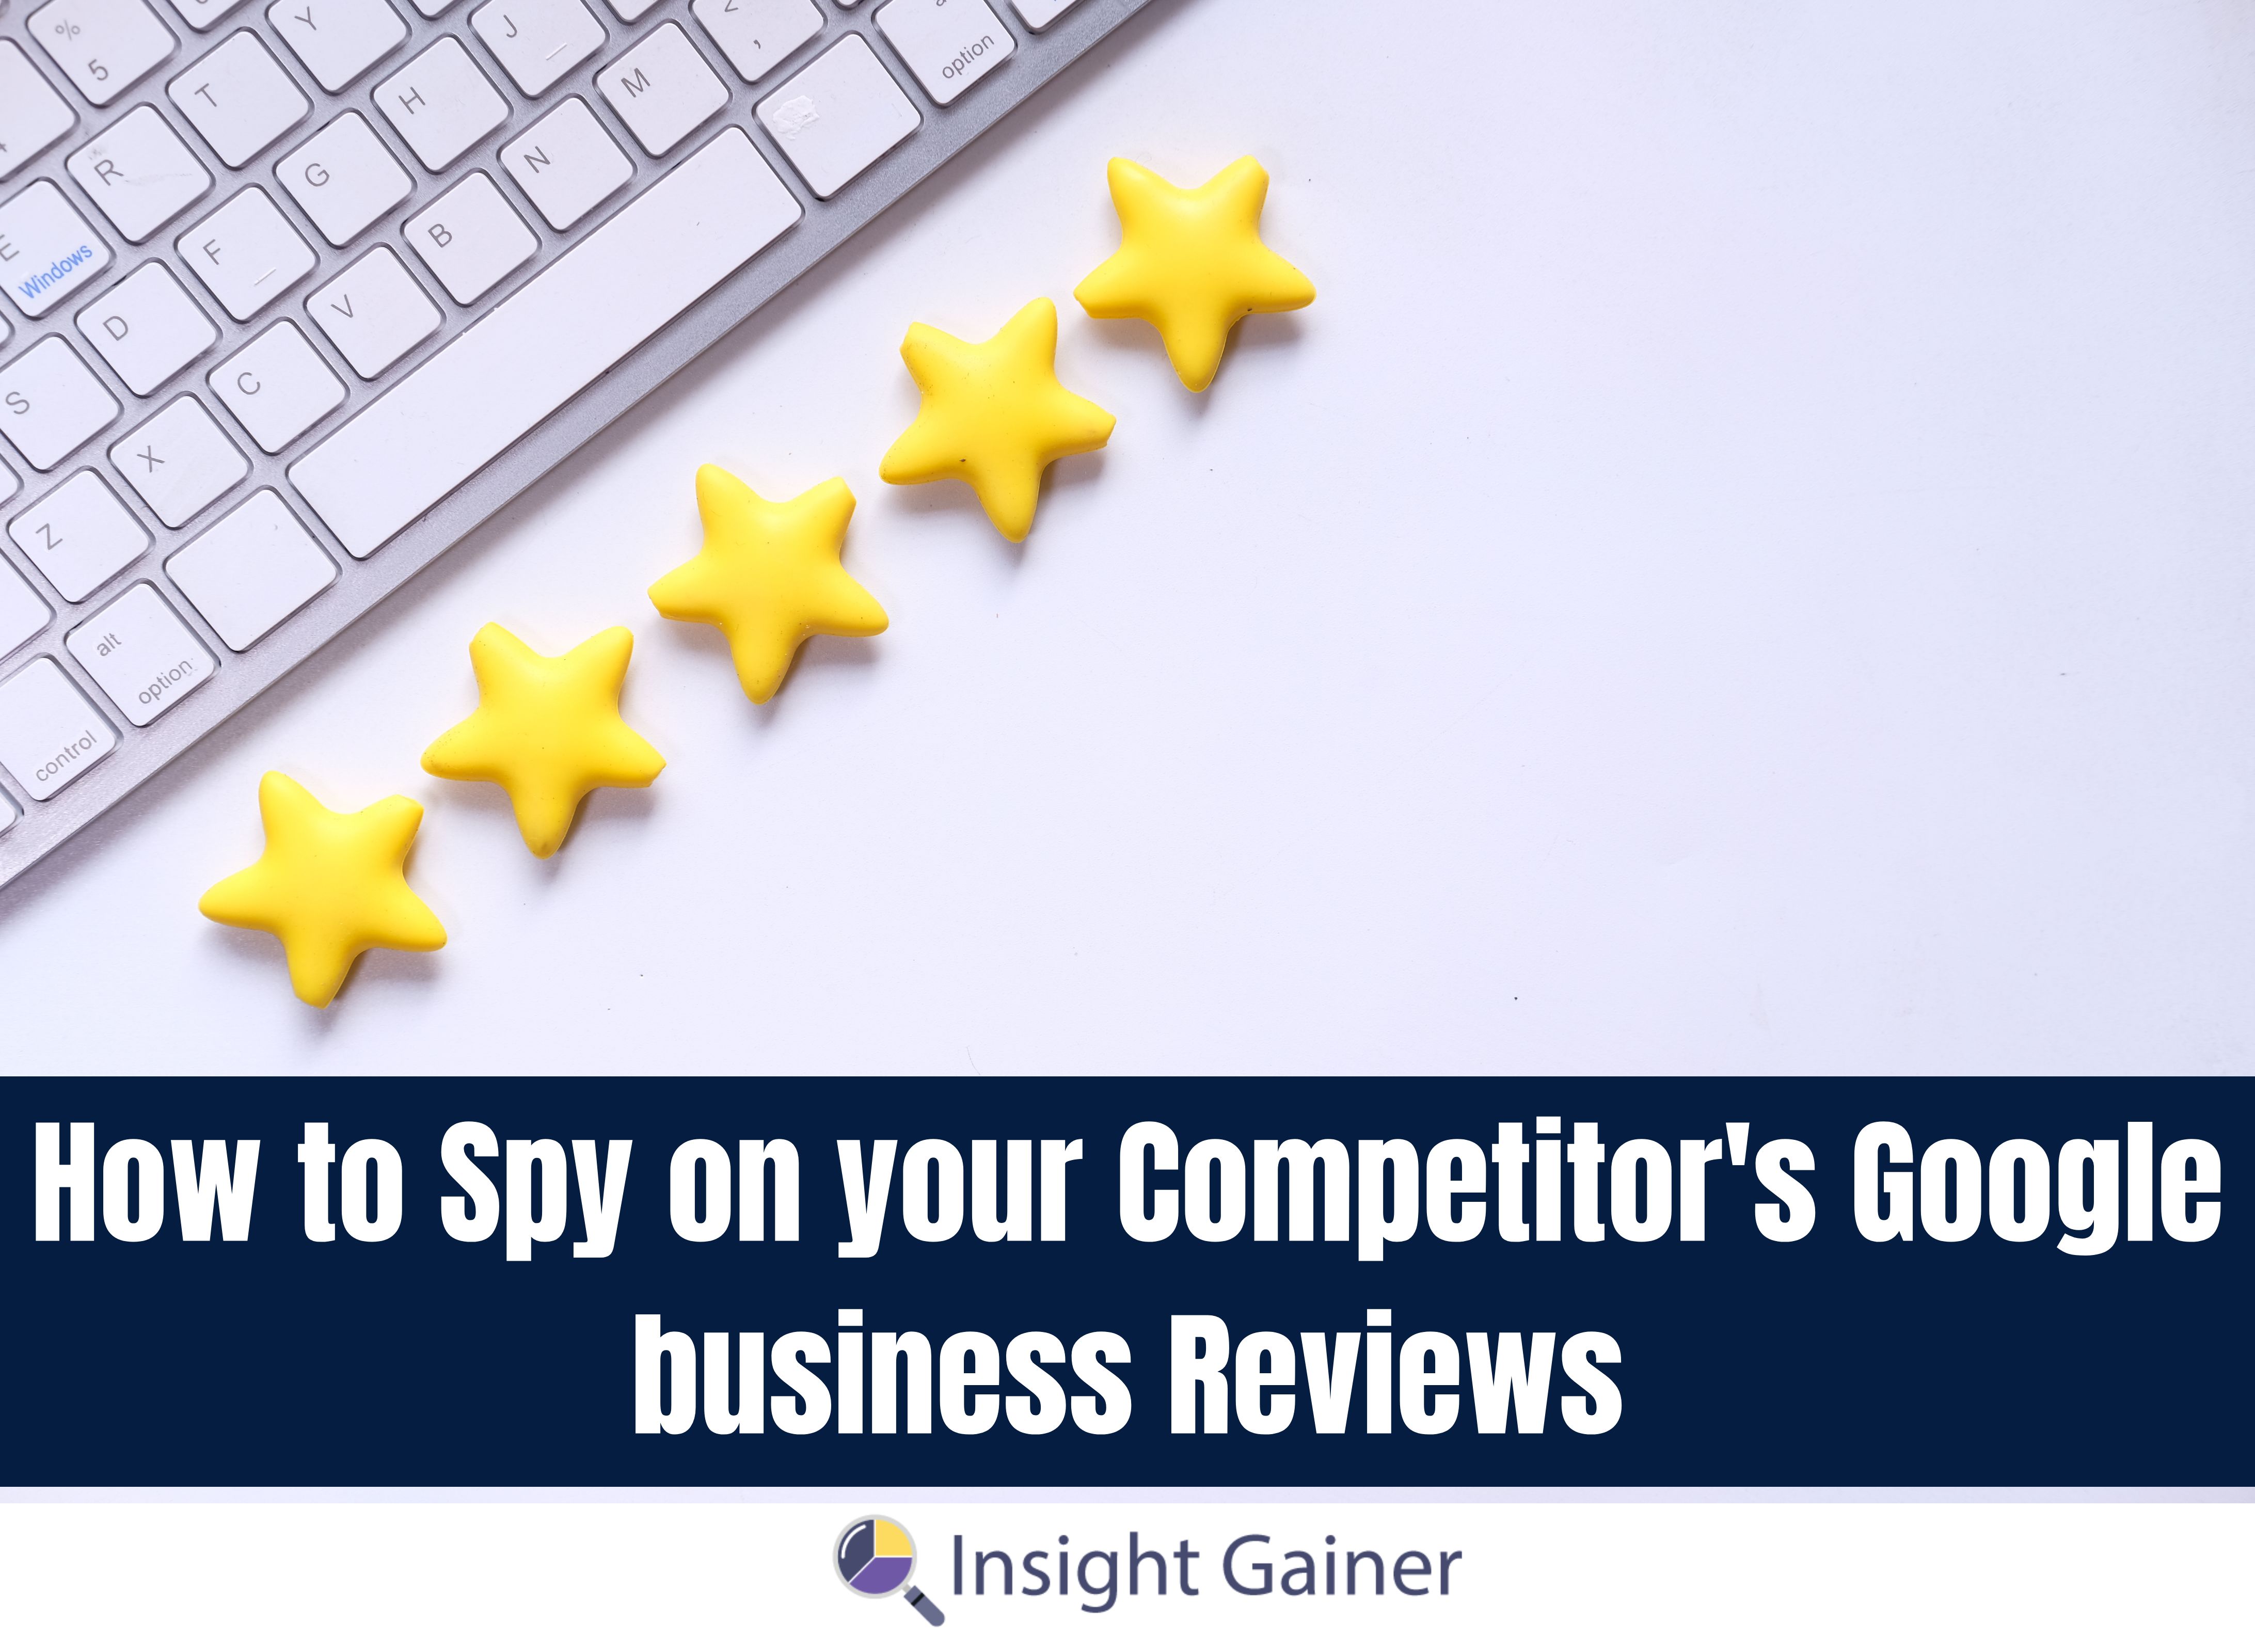 Google Business Reviews, Insight Gainer